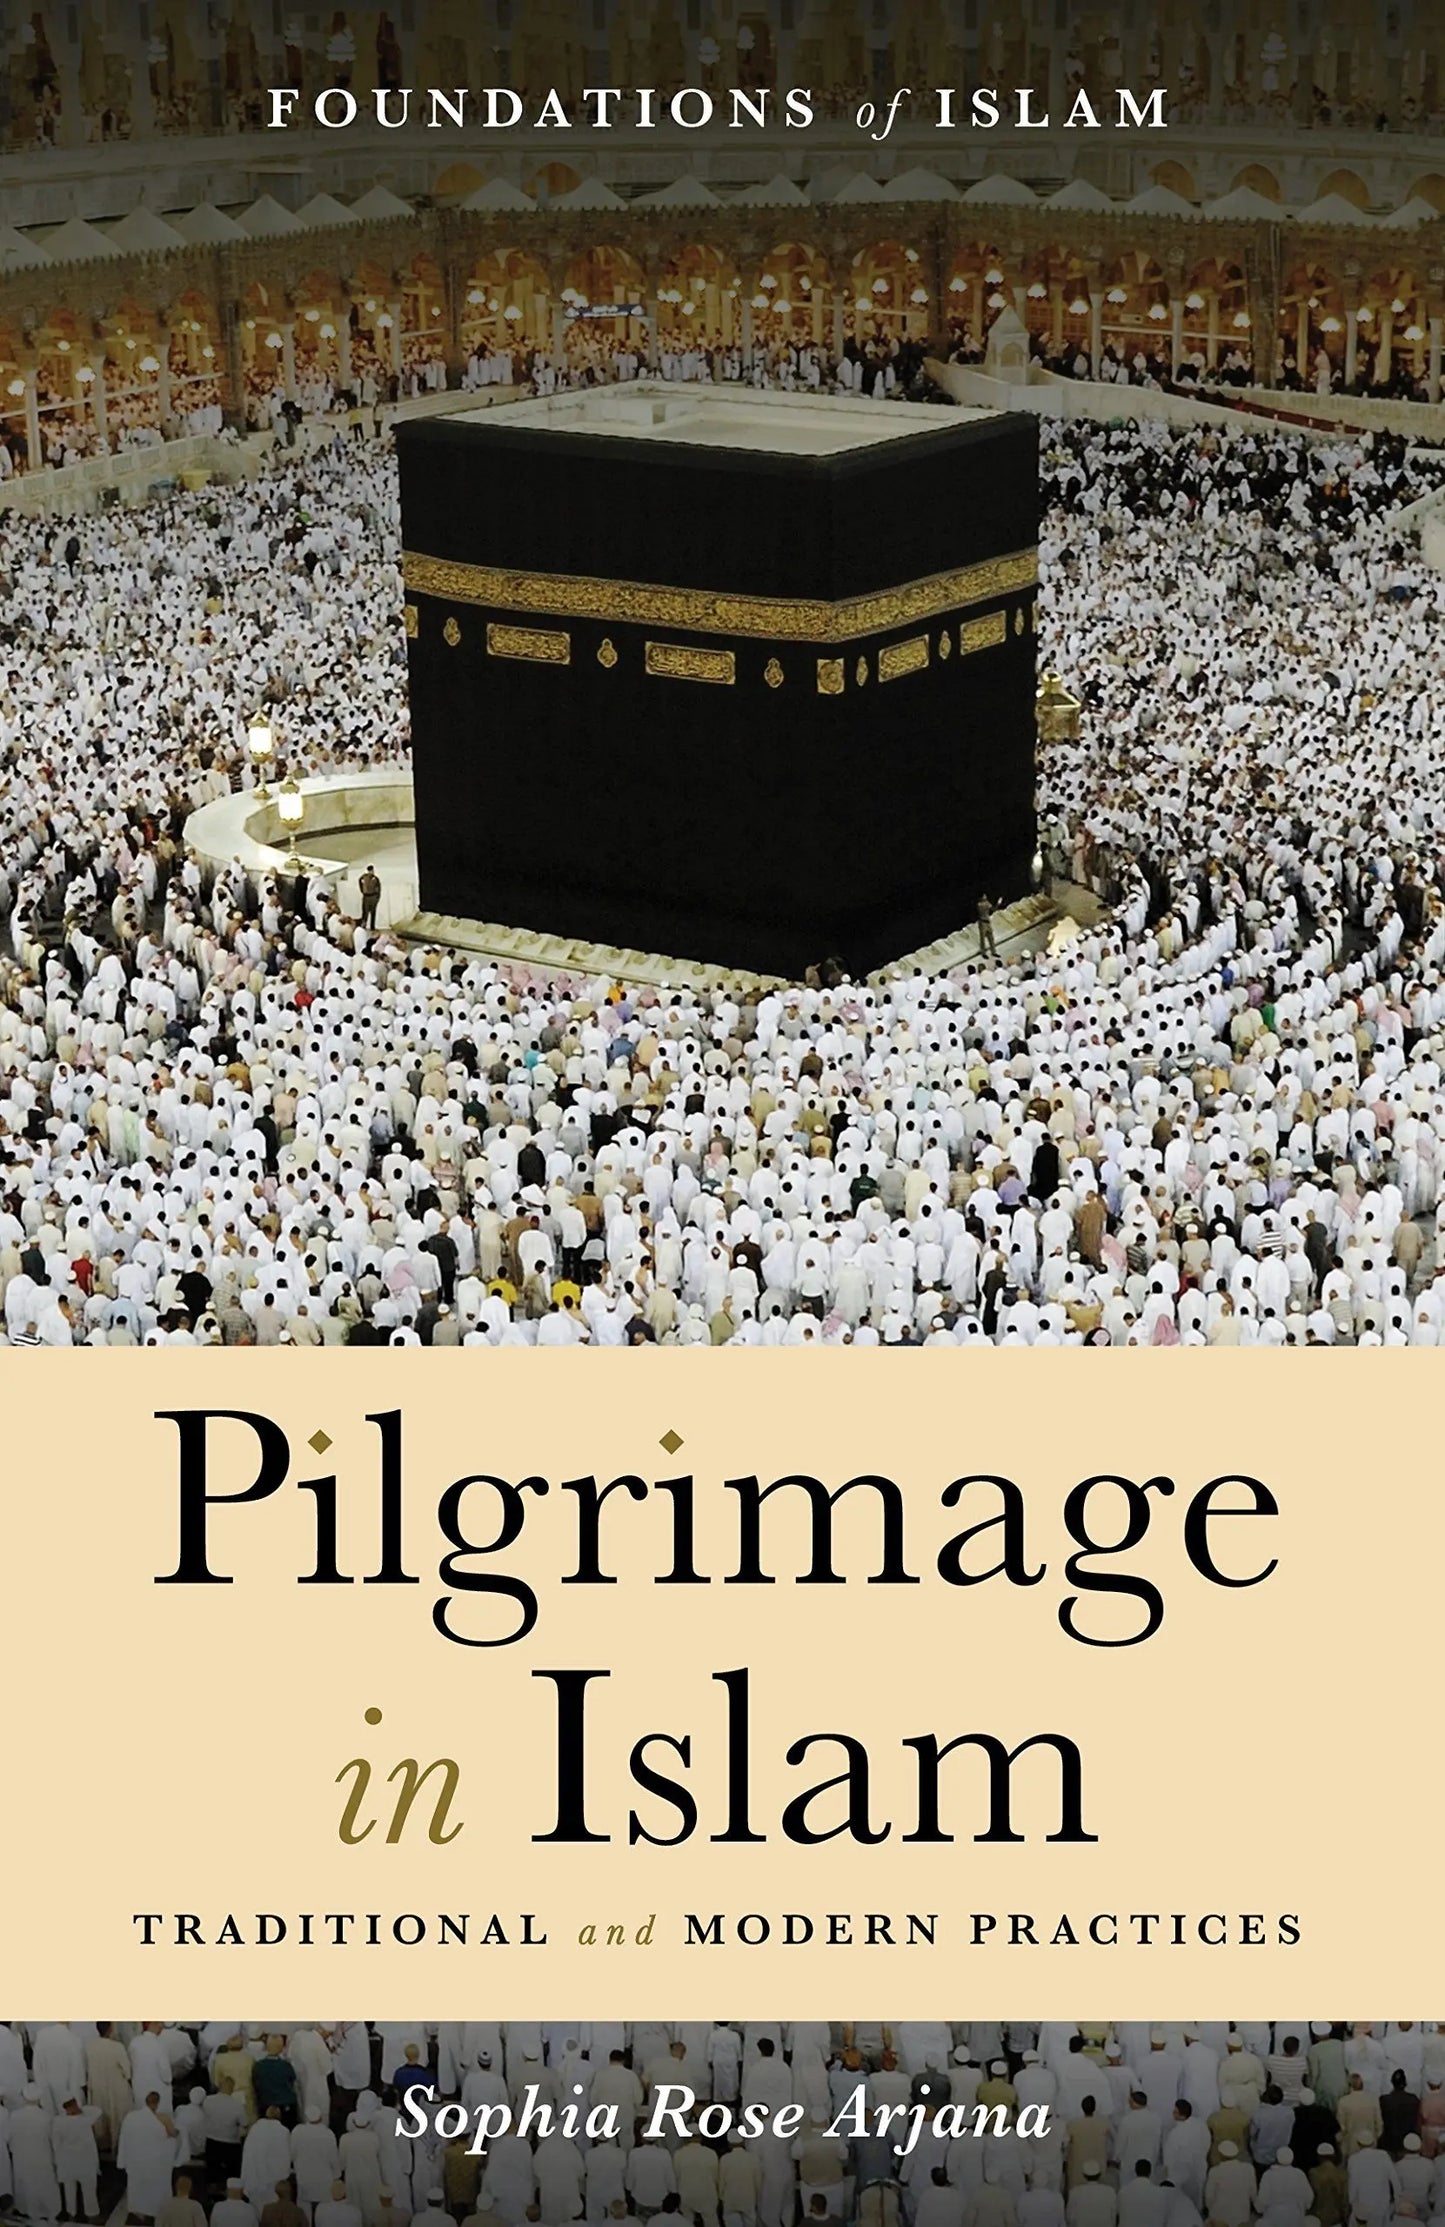 Pilgrimage in Islam: Traditional and Modern Practices (The Foundations of Islam)